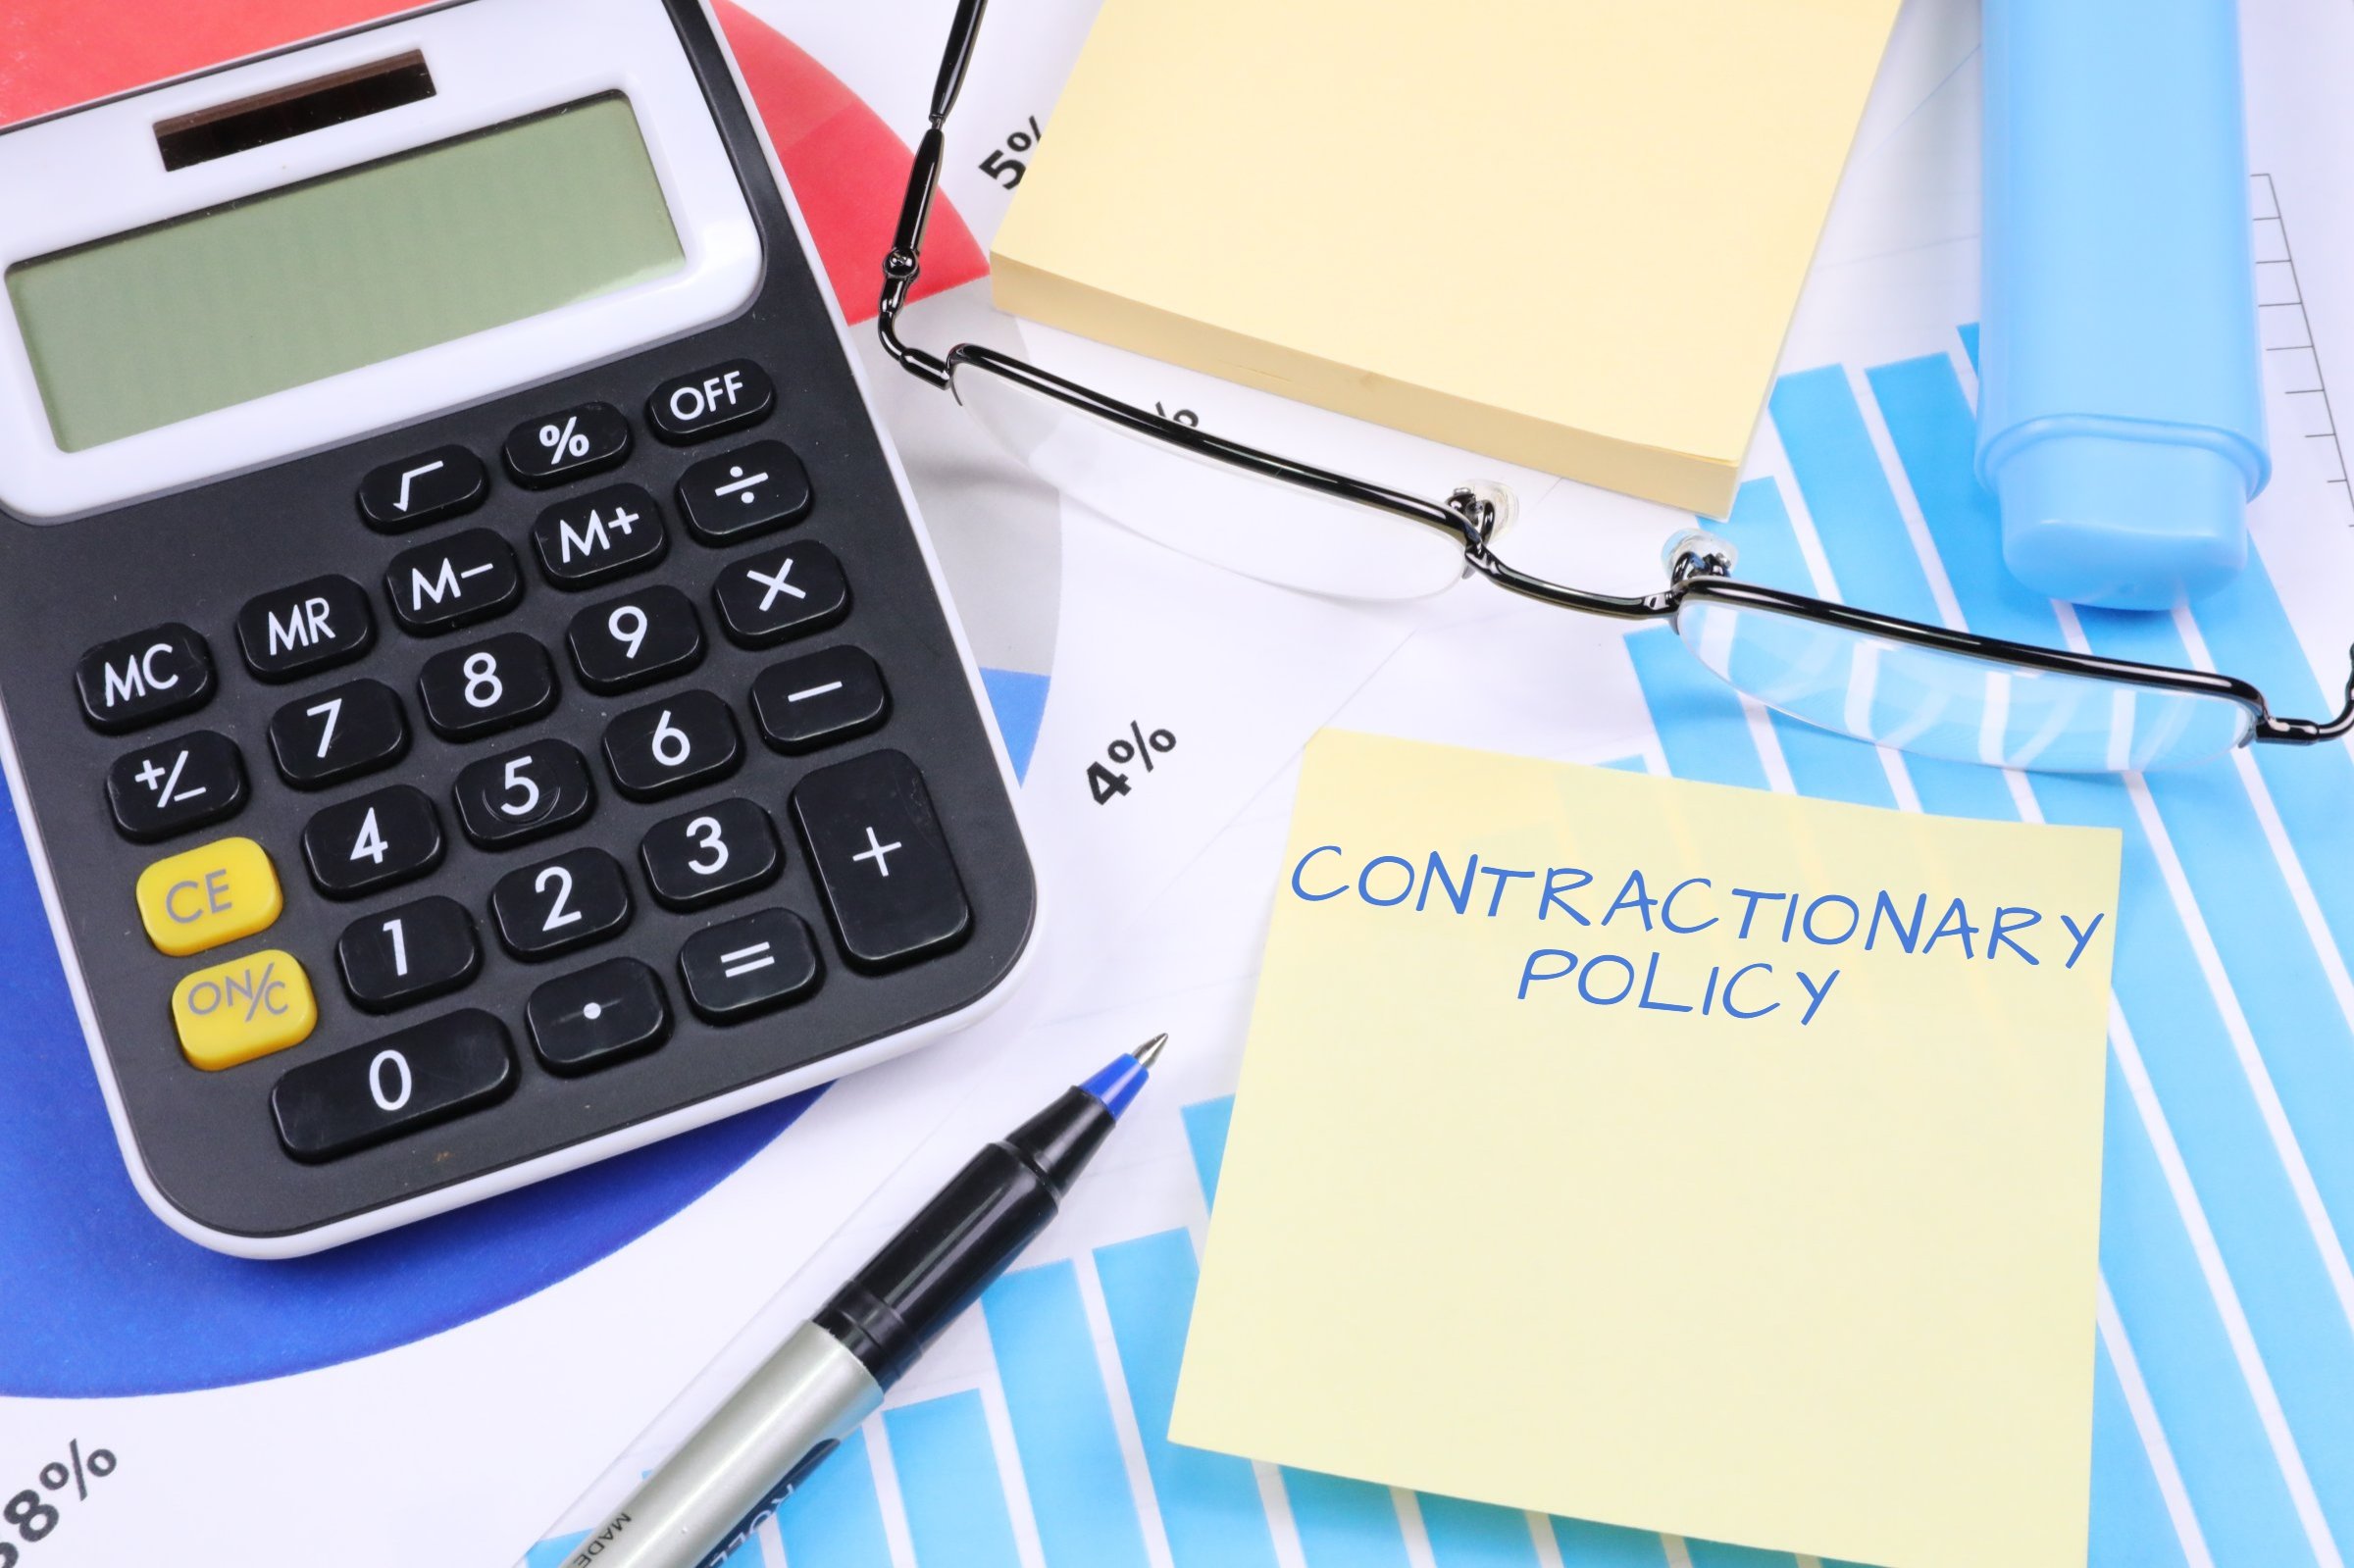 Contractionary Policy